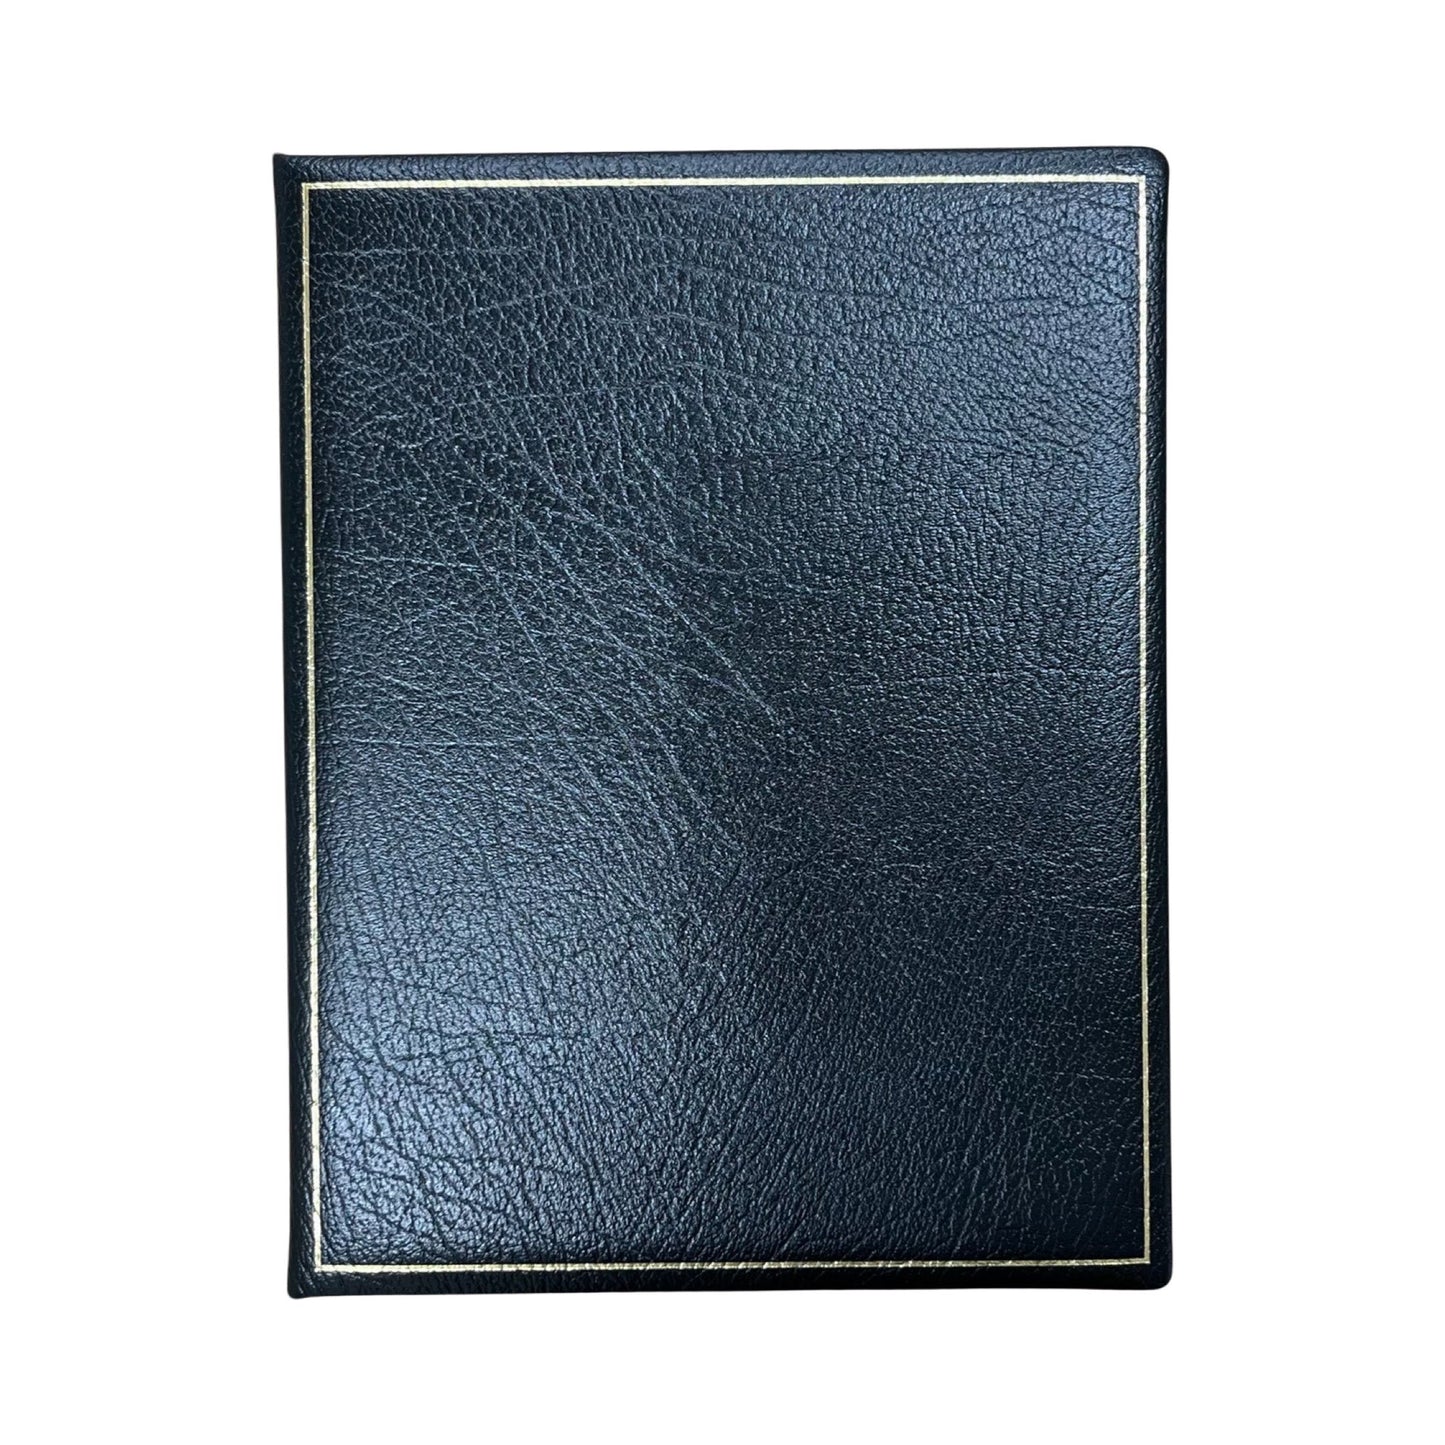 Leather Guest Book Notebook | 9x7" | Hardcover with Gold | Textured Calf with Padding | Blank Pages